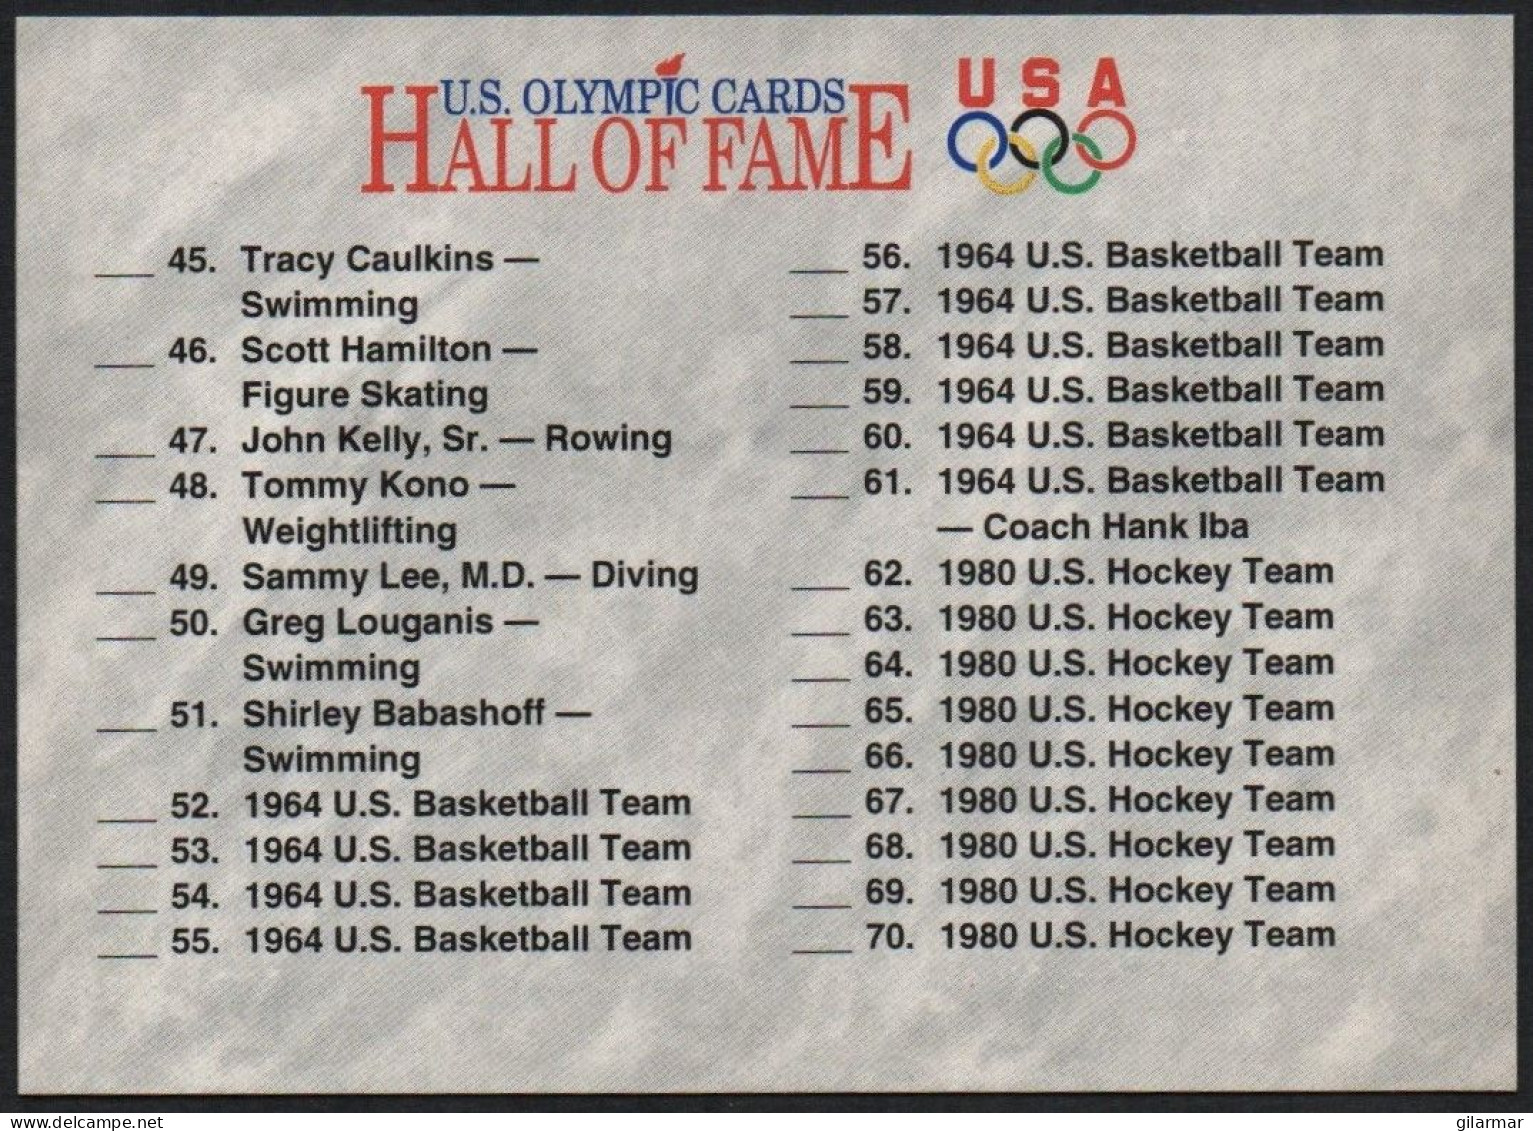 UNITED STATES - U.S. OLYMPIC CARDS HALL OF FAME - CHECKLIST - # 89 - Trading Cards